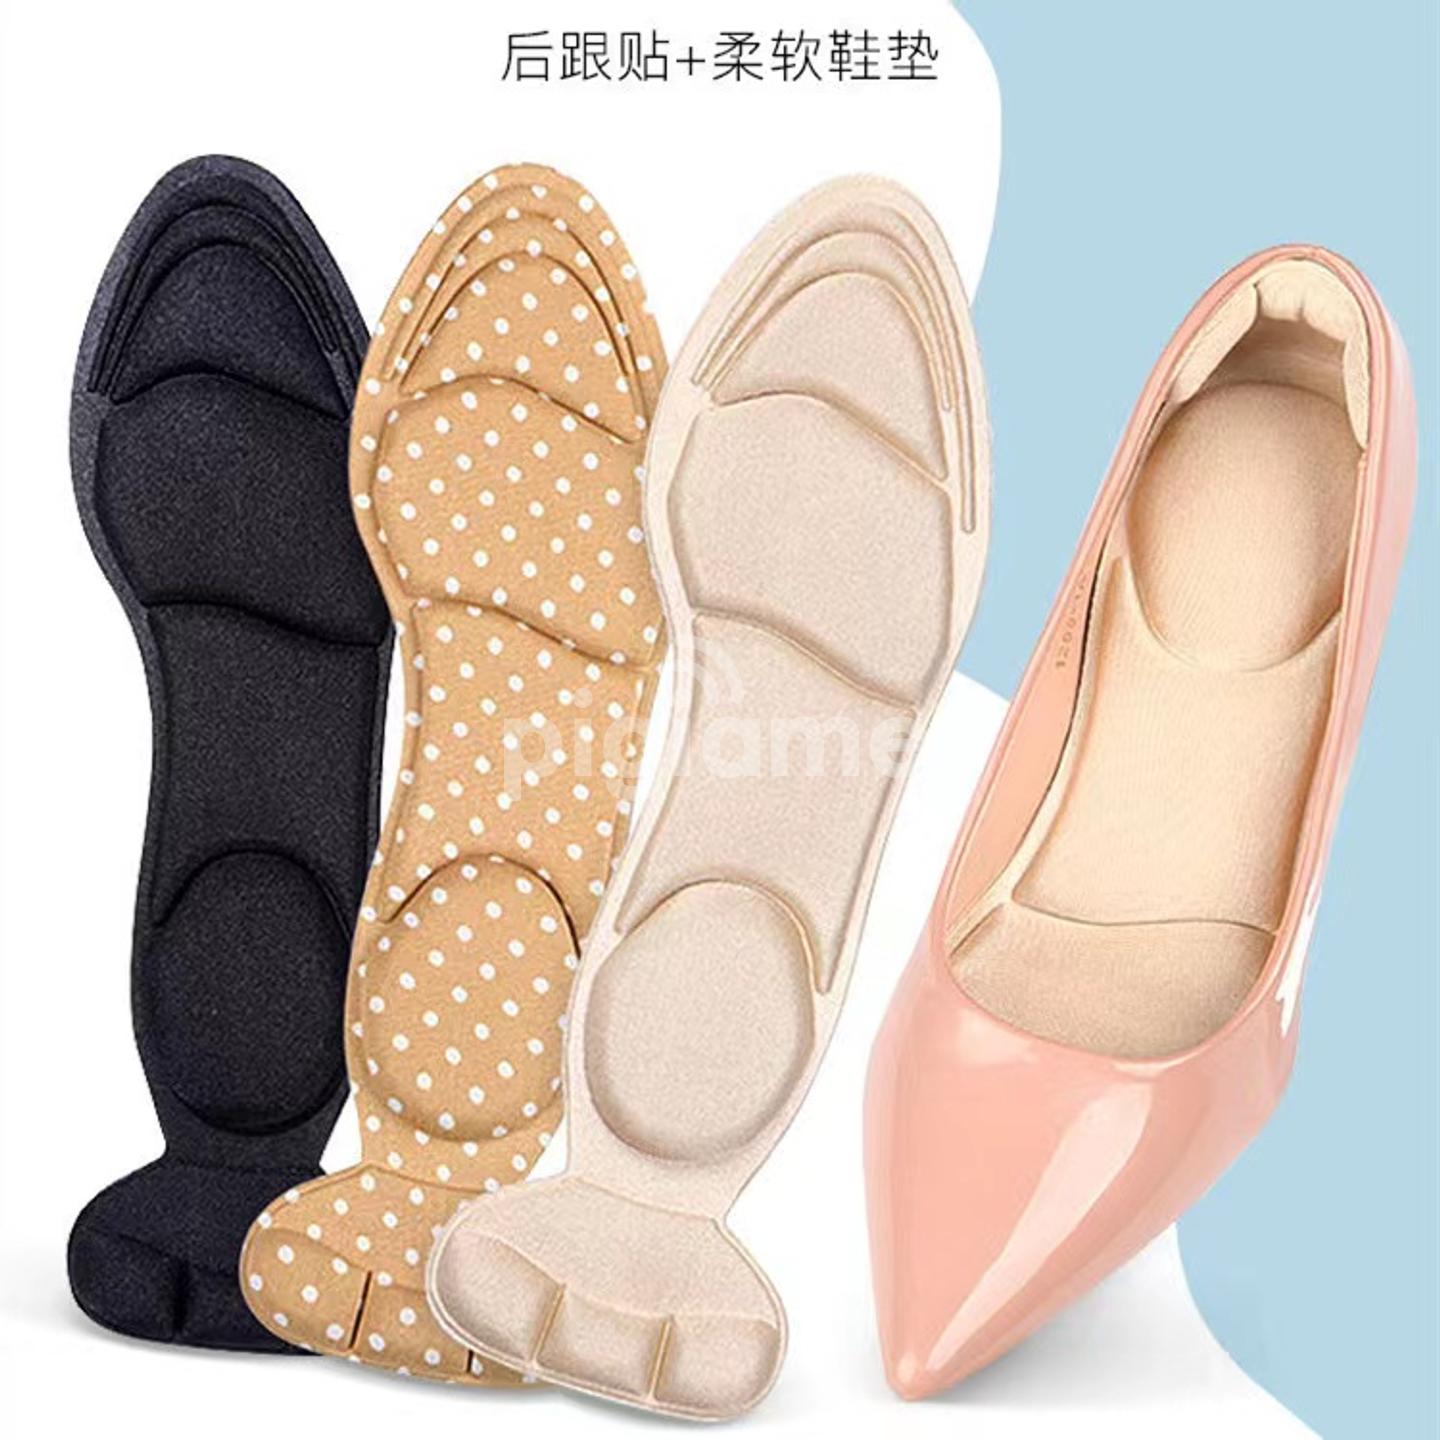 Heel Pads For Shoes That Are Too Big, High Heel Insoles, High Heel Pads,  Heel Grip Inserts, Foot Care Set, Anti-slip Shoe Cushions | Fruugo NO